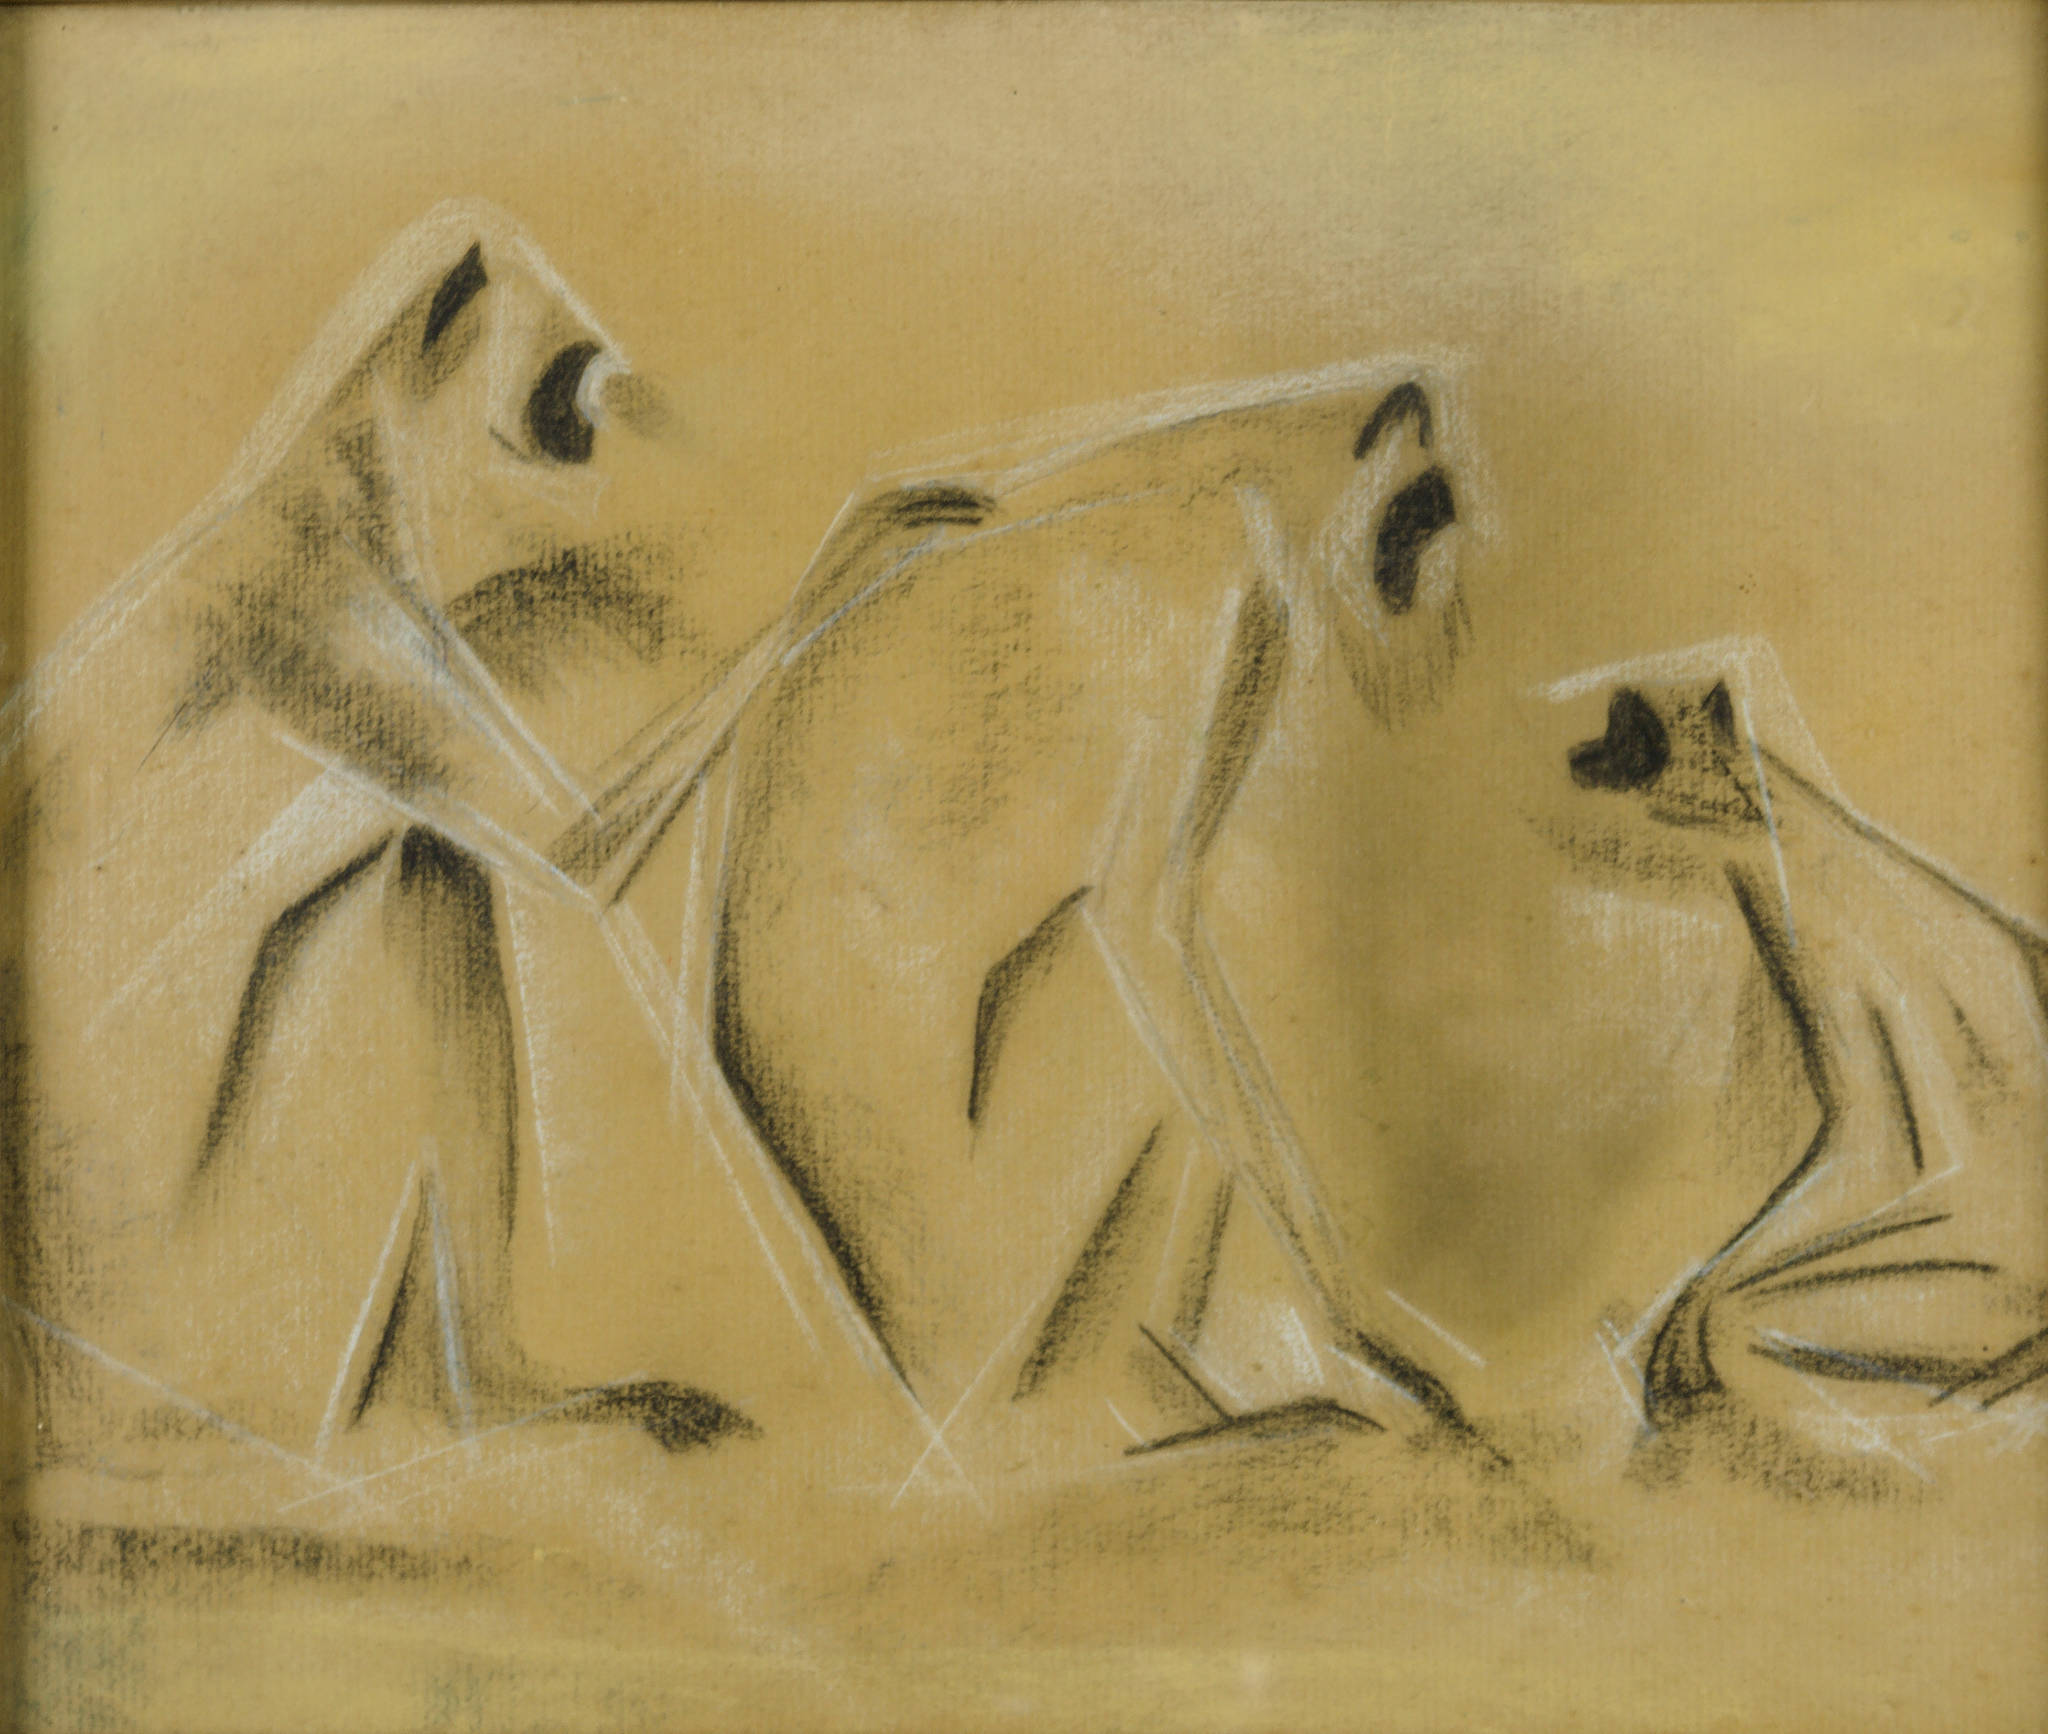 Frank Hinder 'Untitled (Monkeys)' - Collected by Carmelo